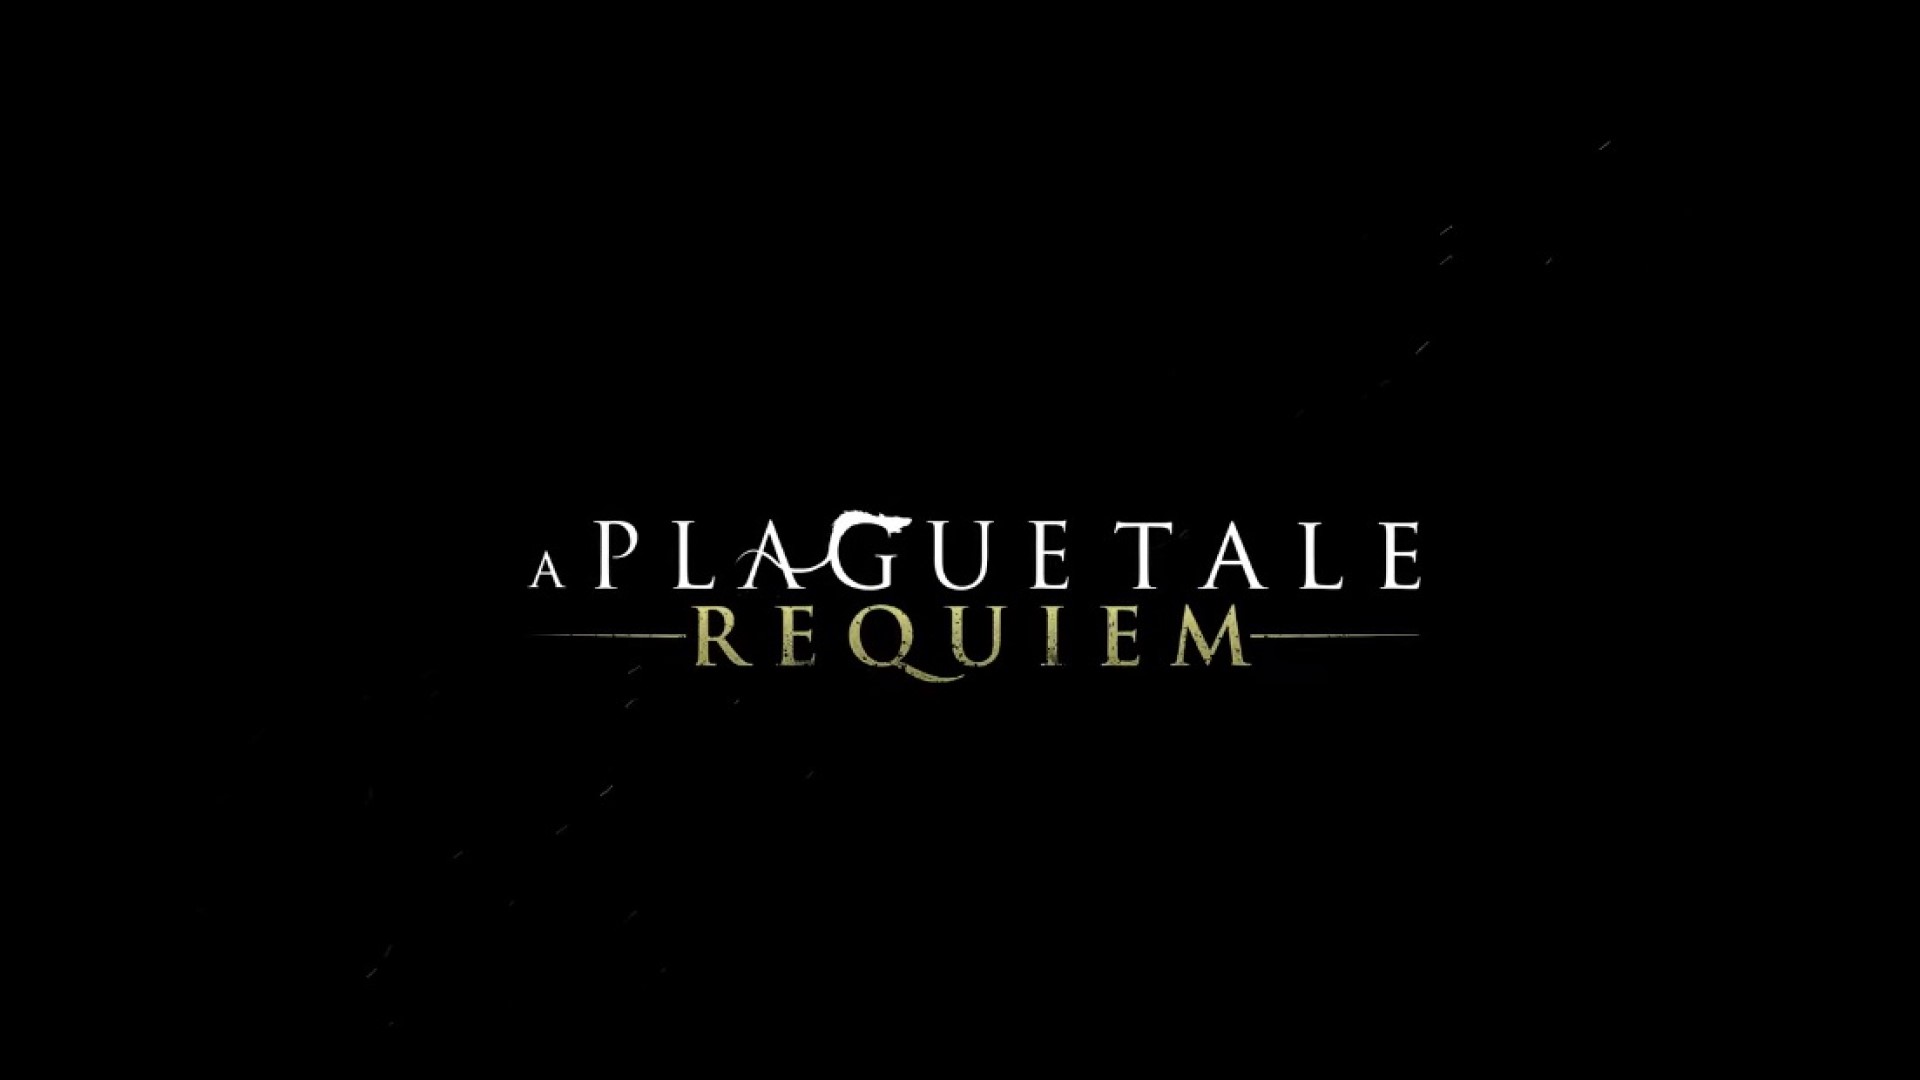 Is a Plague Tale: Requiem Coming to Xbox One or PS4? – GameSpew